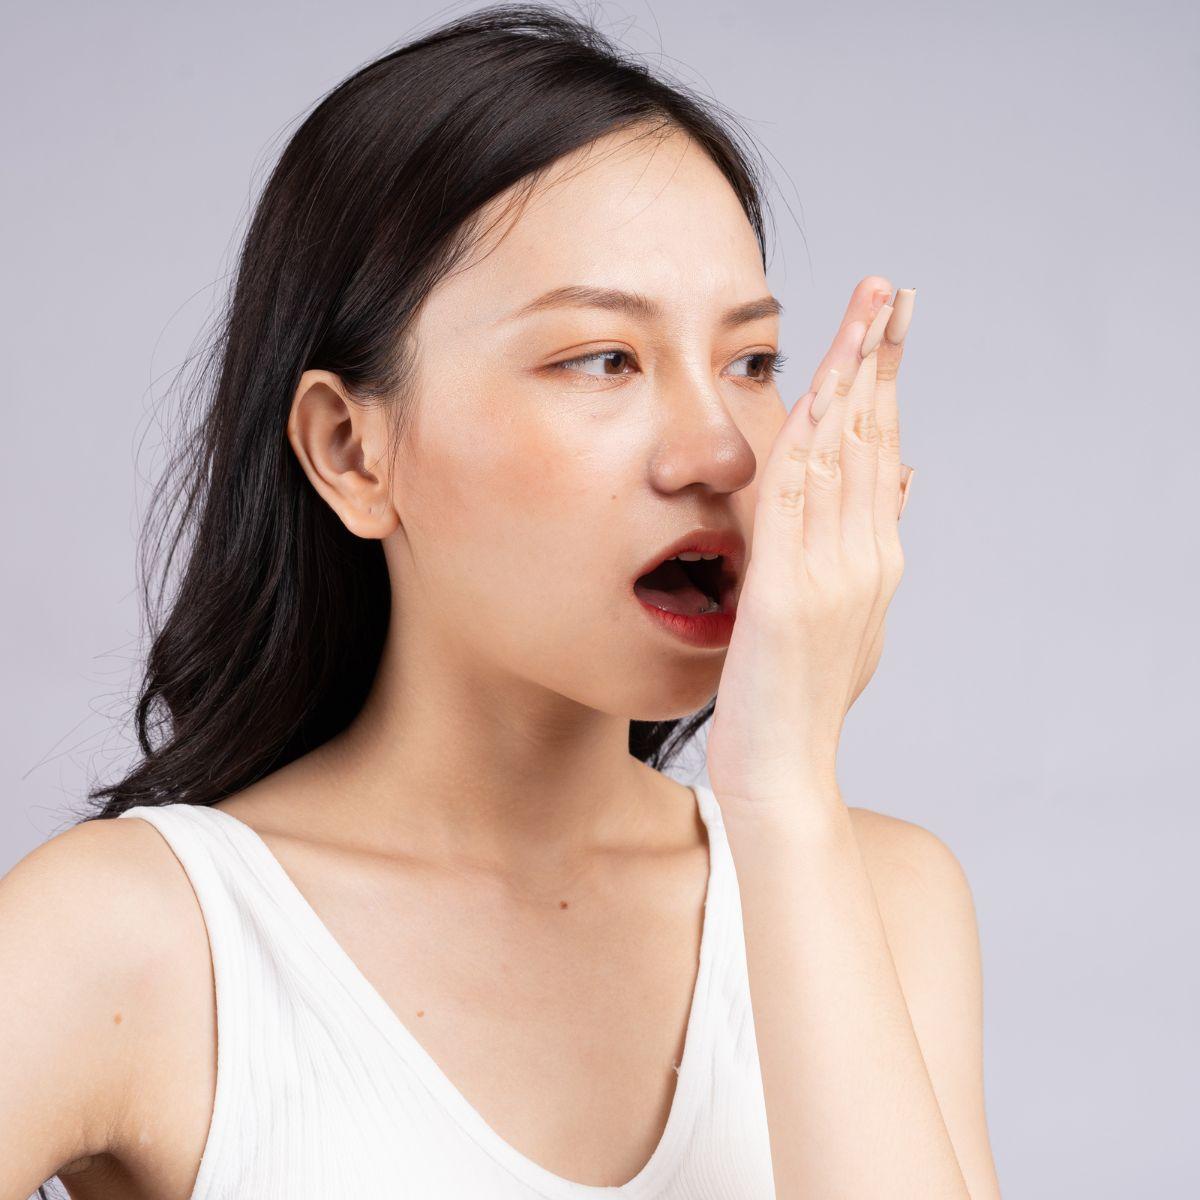 Bad breath : What causes it and how to prevent it